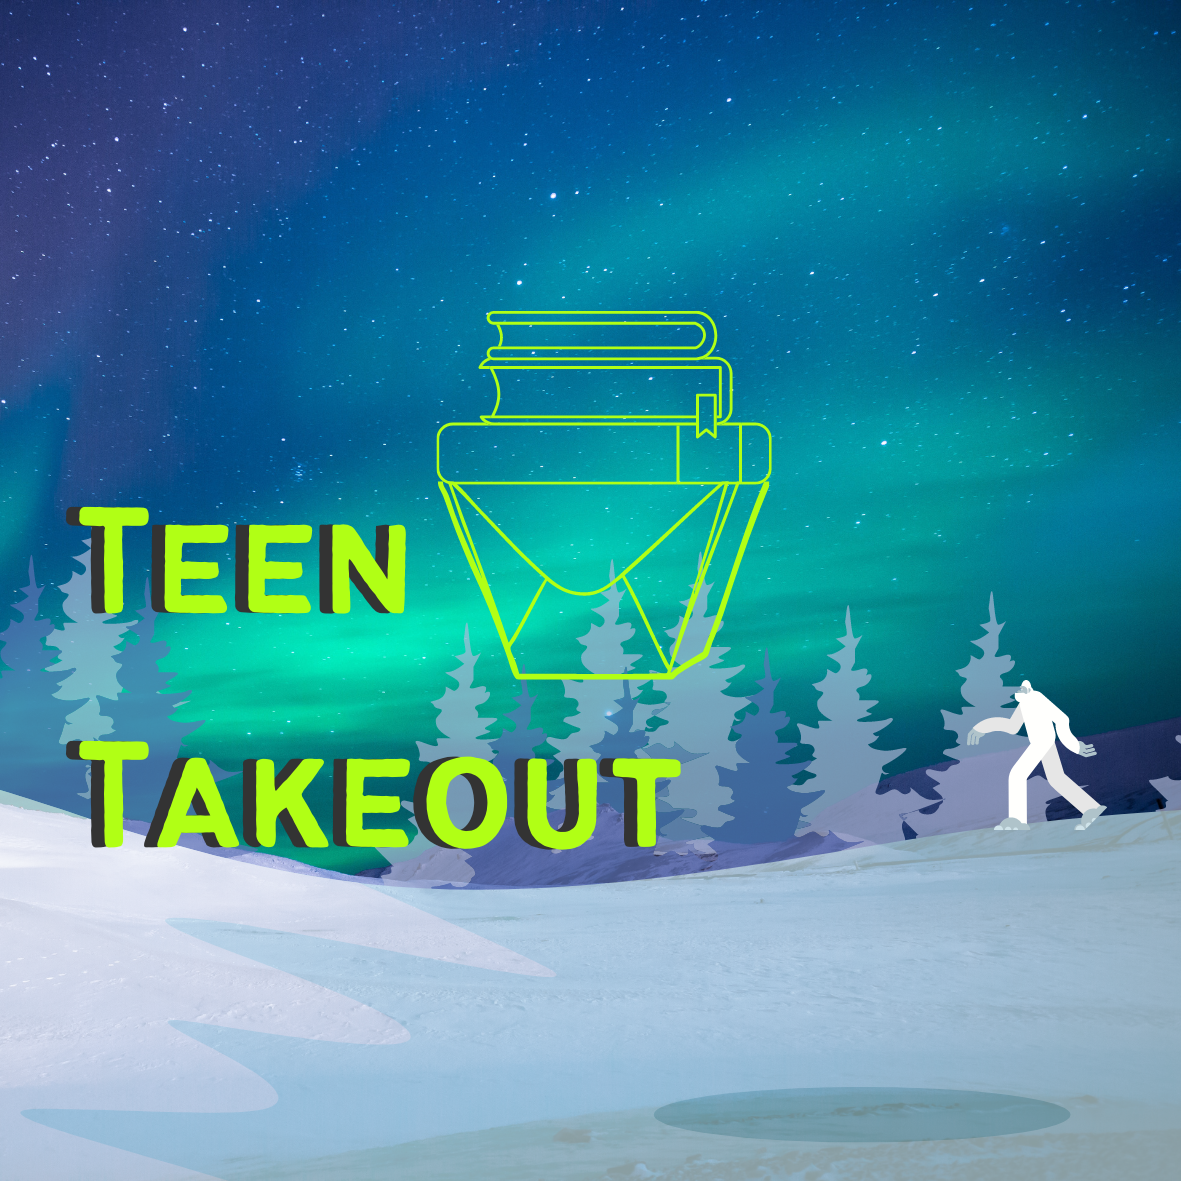 Text reads "Teen Takeout" in front of  awinter landsca[pe with northern lights and a yeti